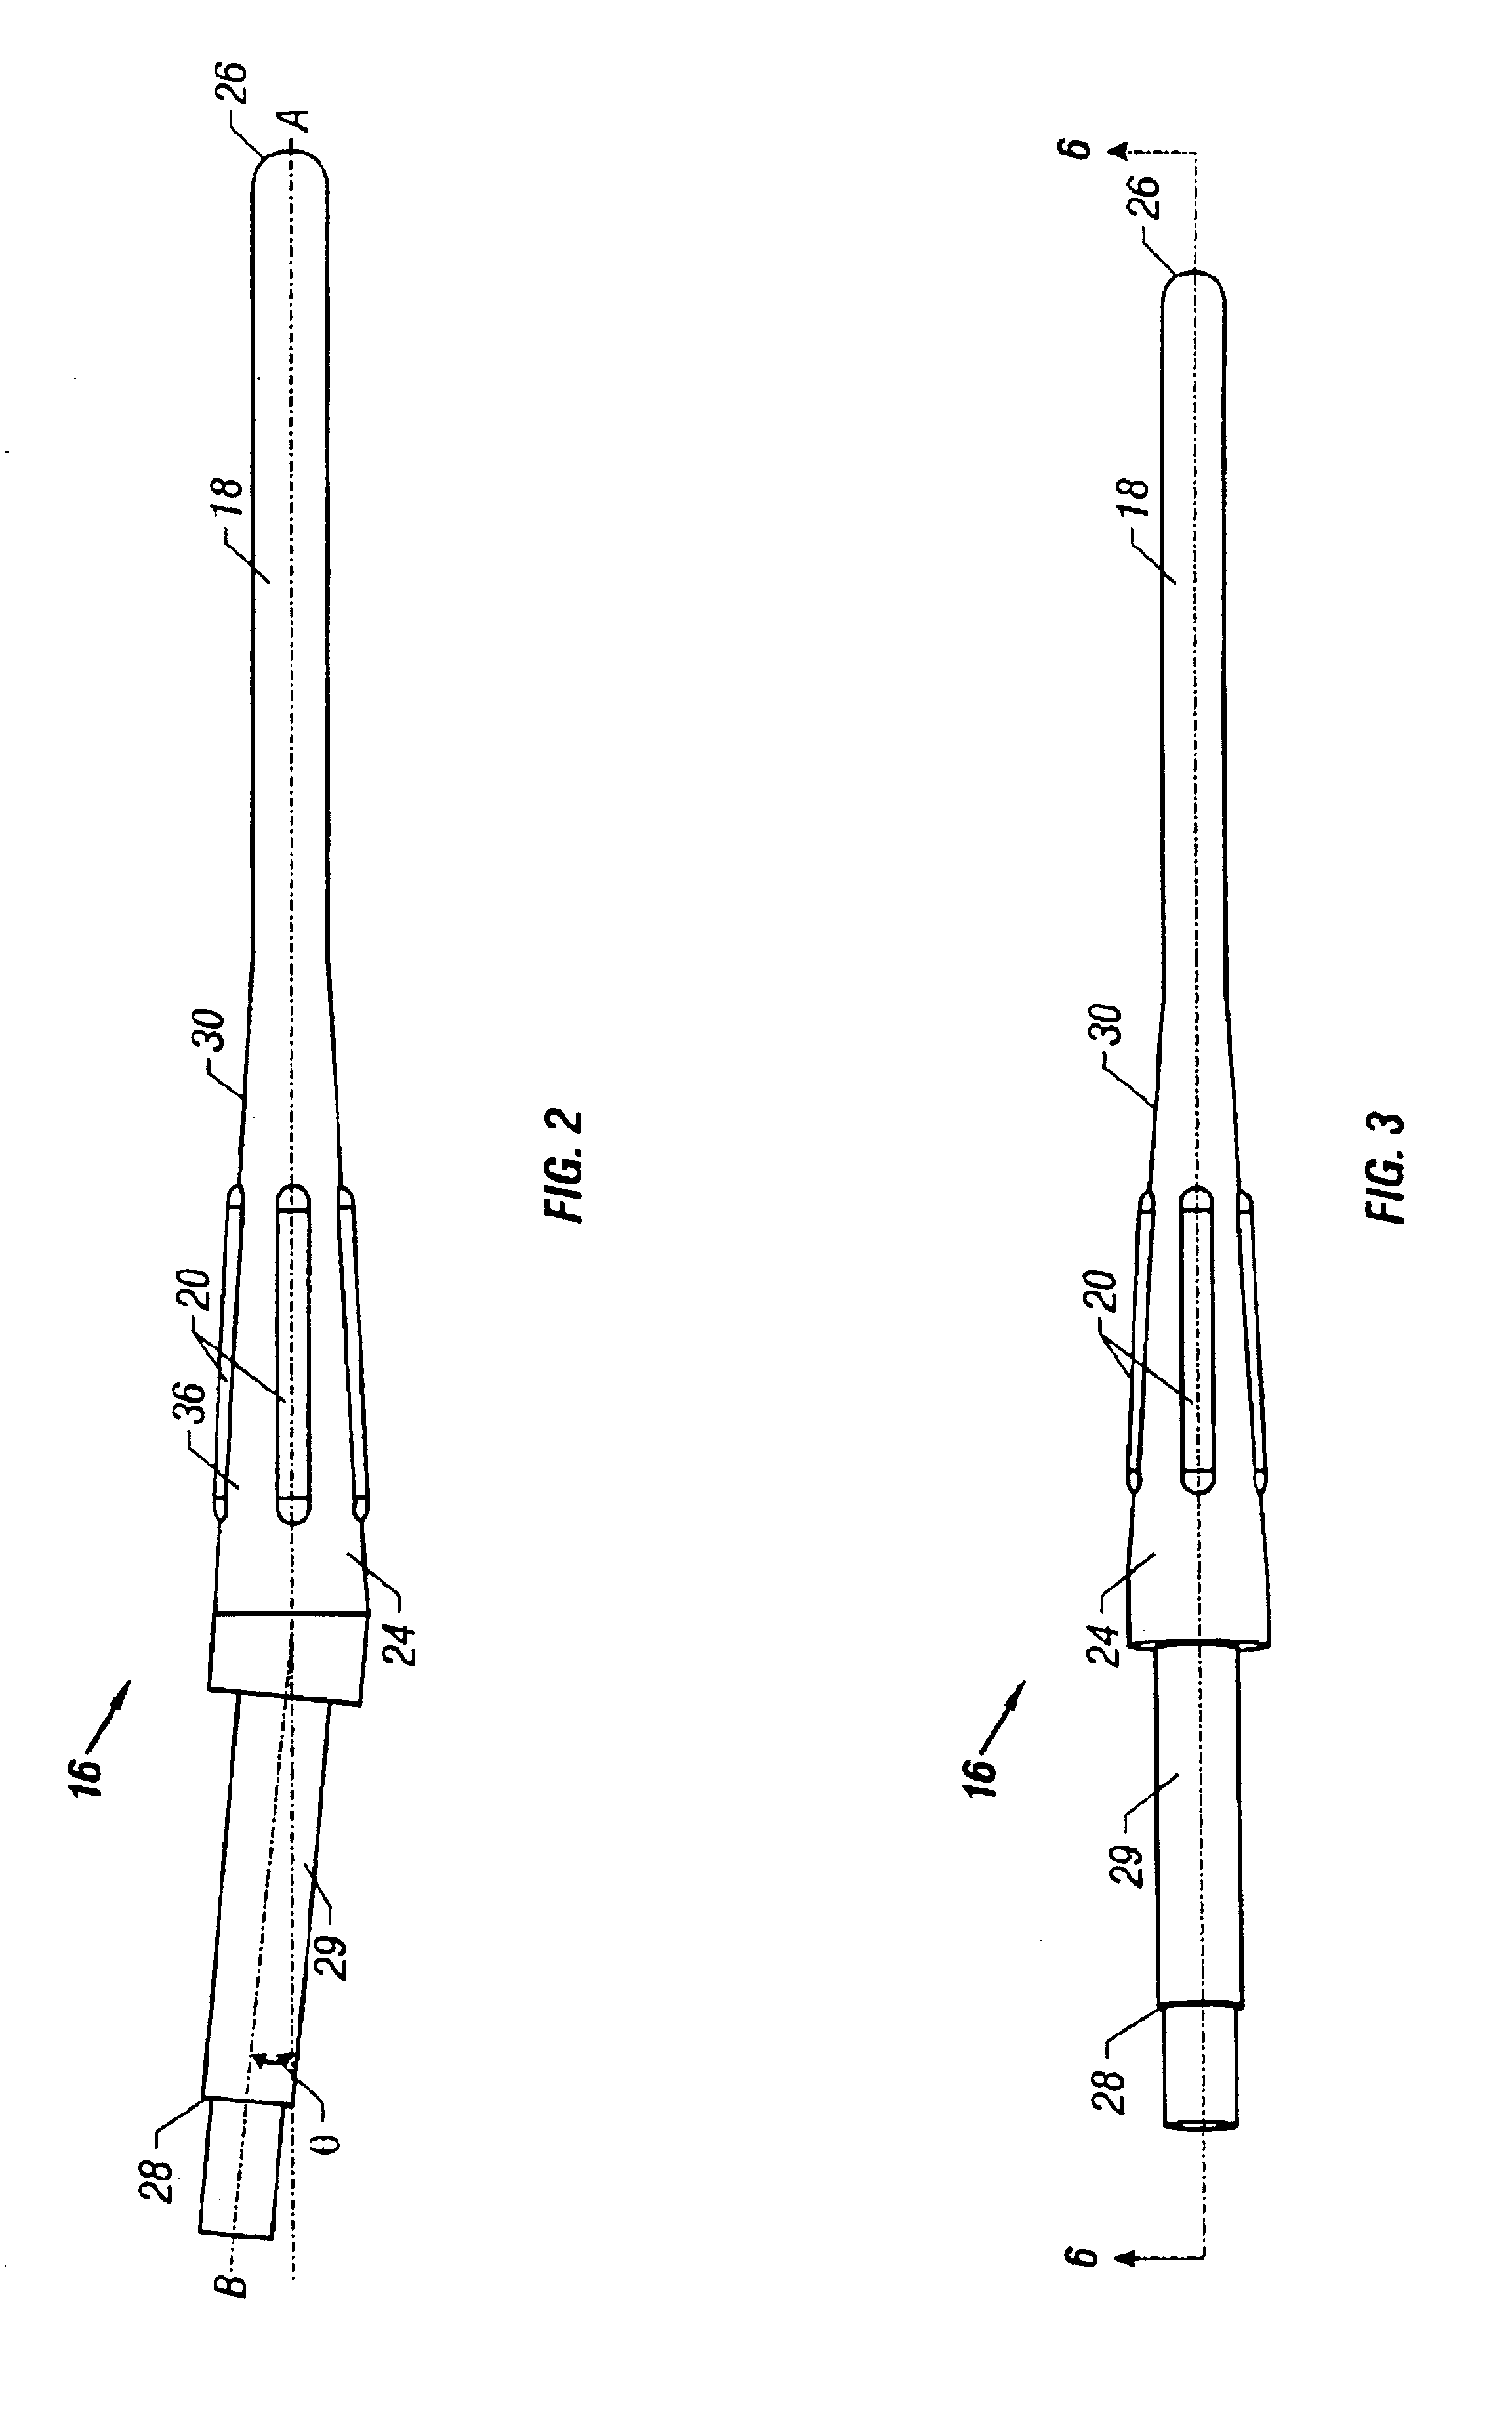 Multi-functional orthopedic surgical instrument and method of using same